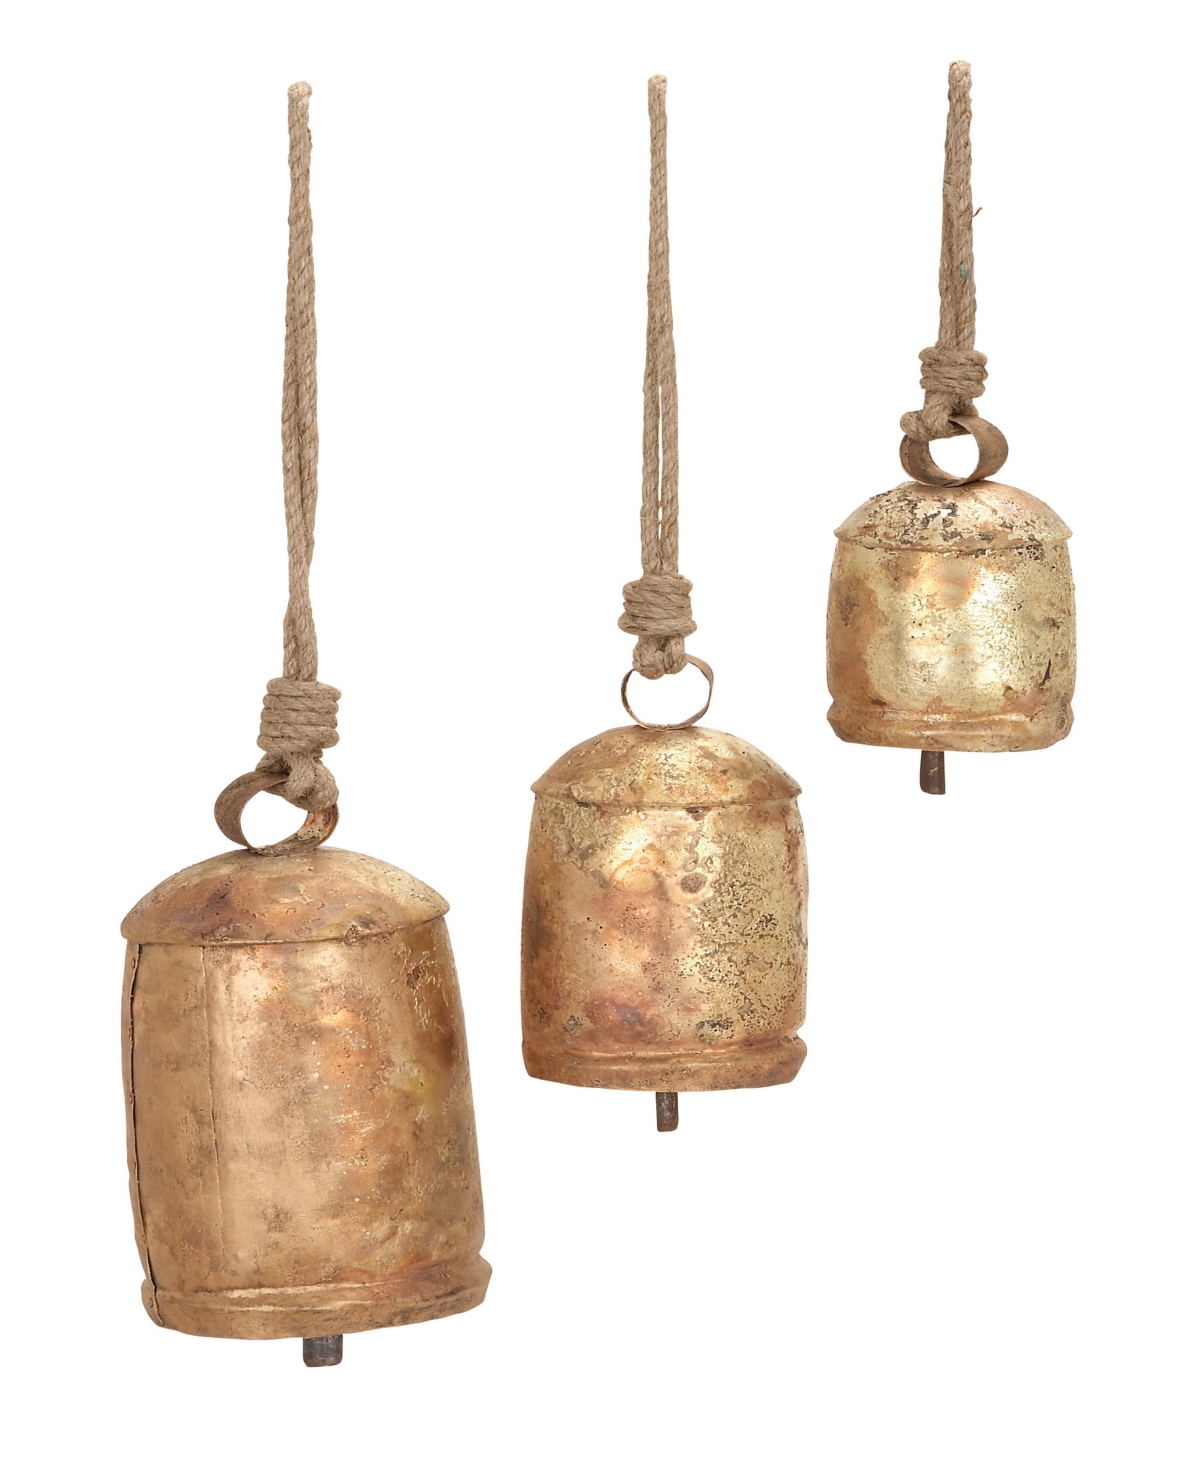 Rosemary Lane Bronze Metal Rustic Decorative Cow Bell With Jute Hanging Rope Set 3 Pieces In Gold-tone